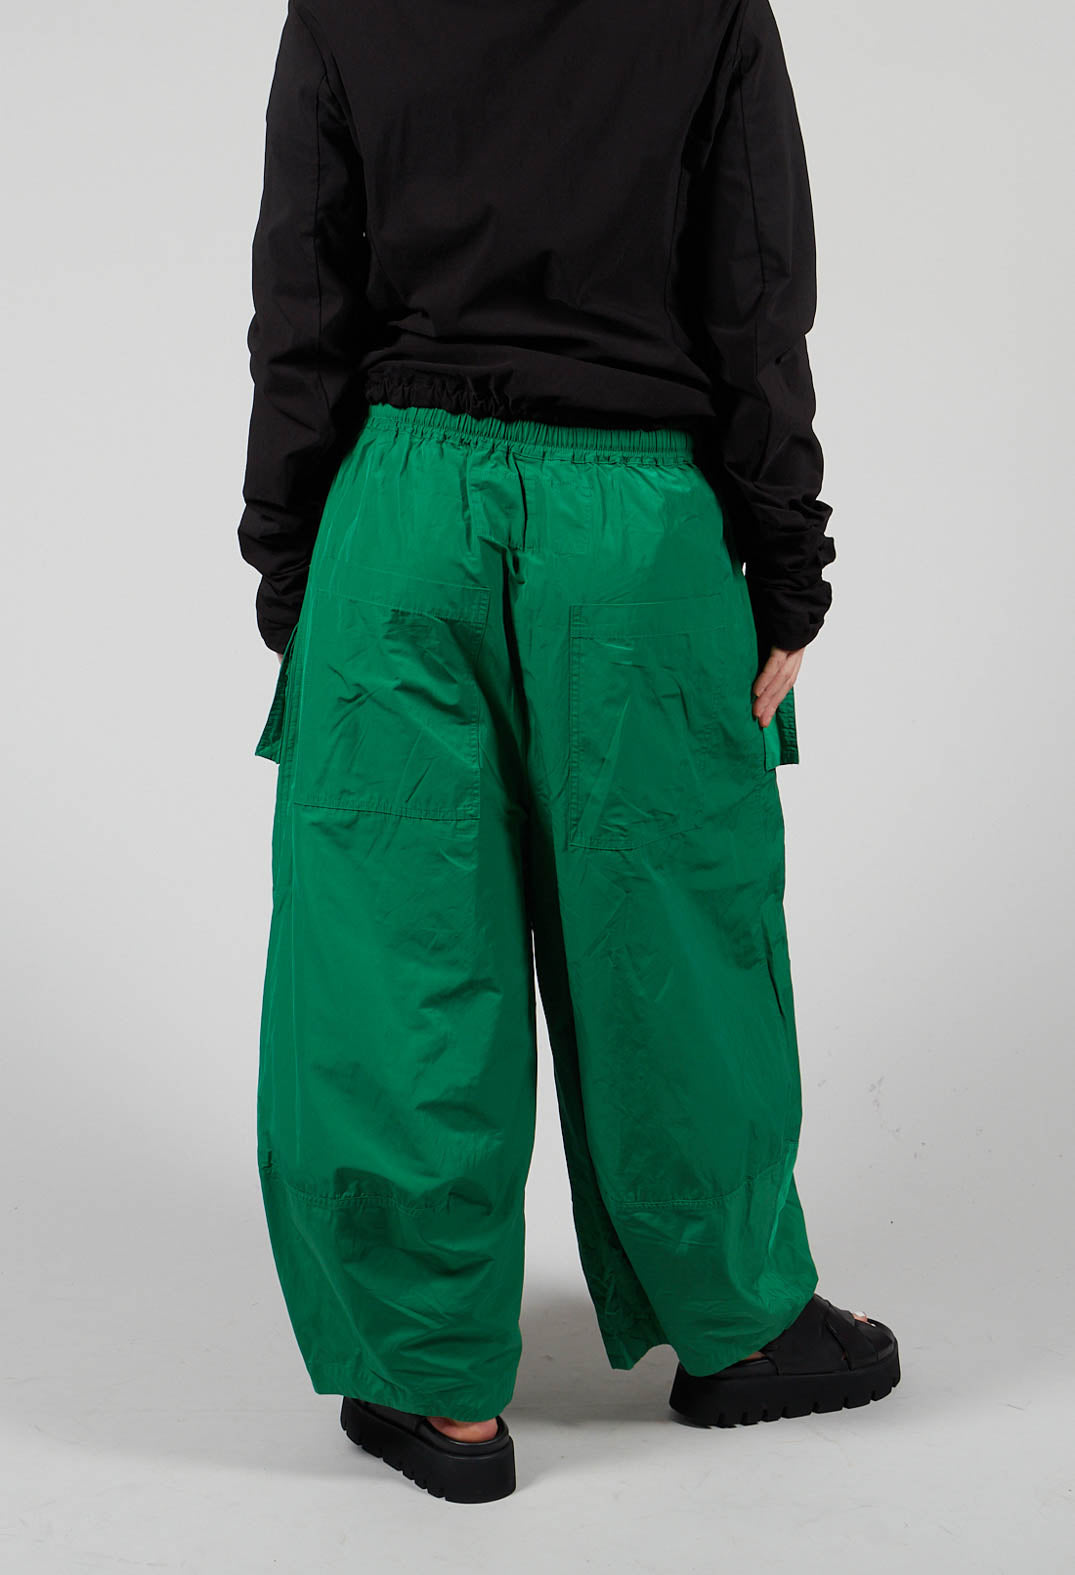 Balloon Style Utility Trousers in Apple